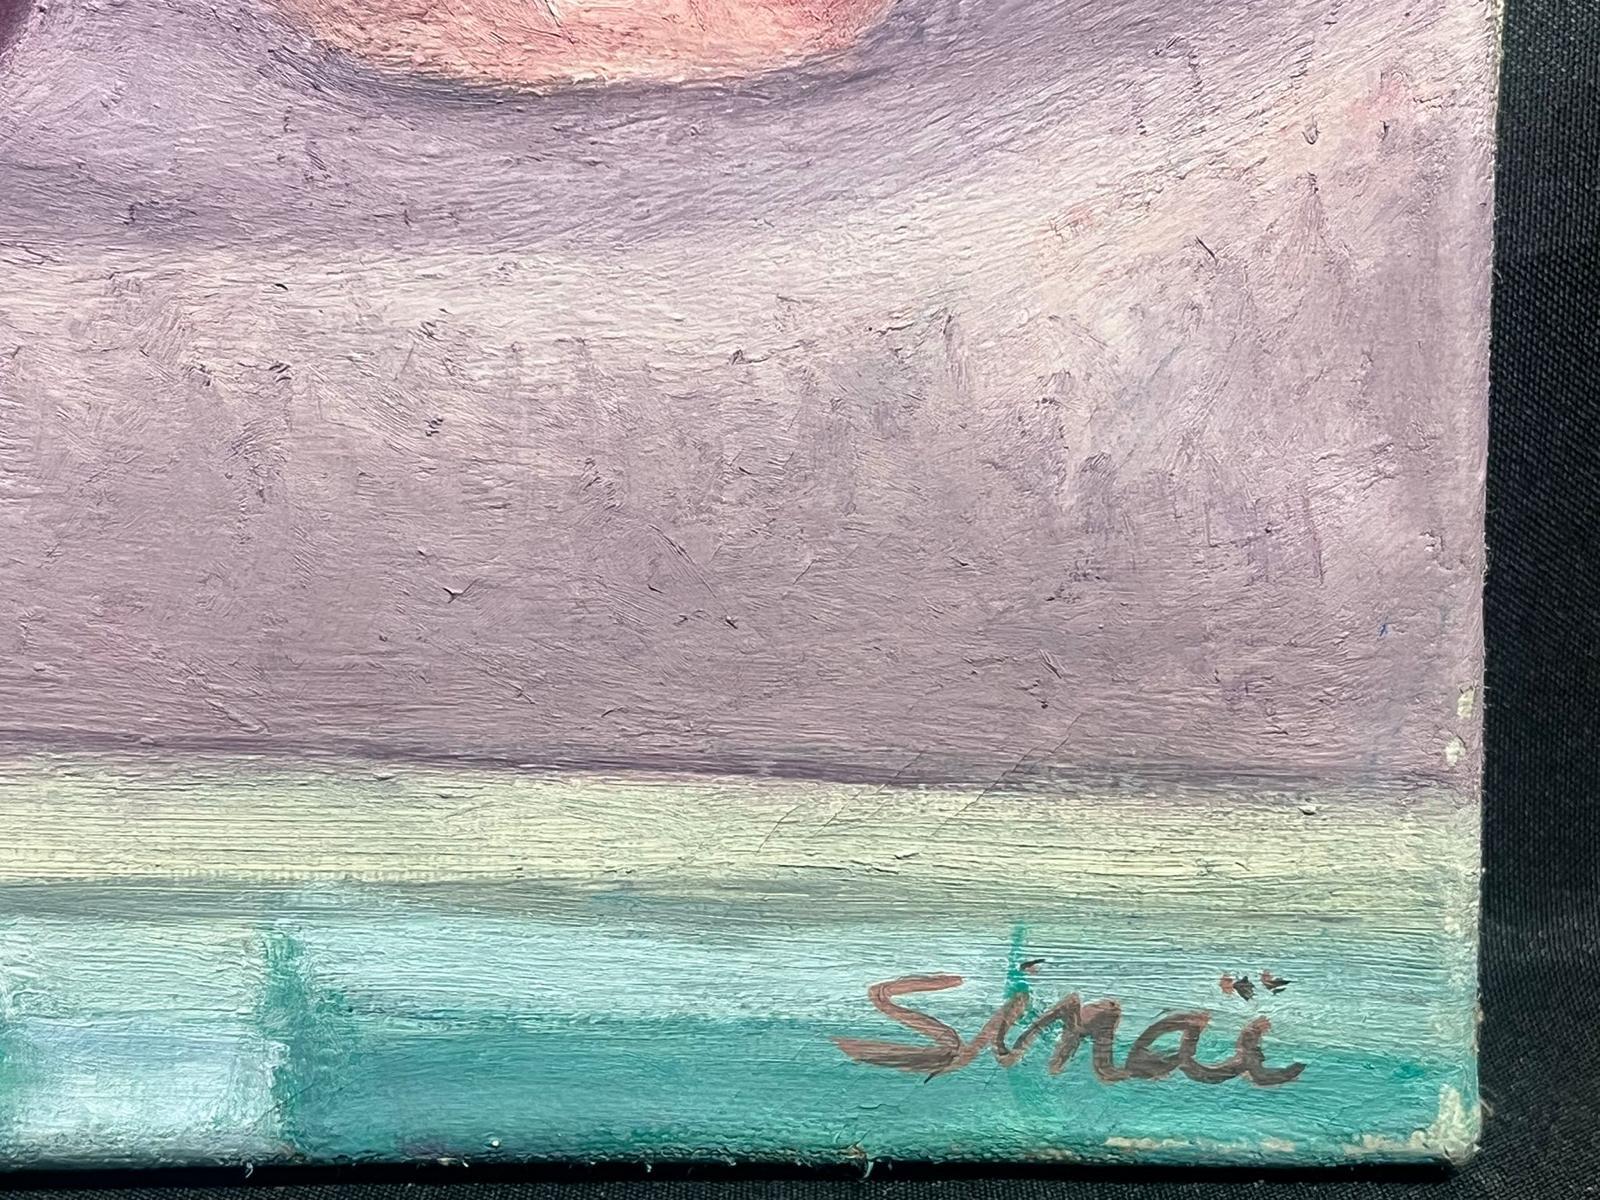 signed Sinai
French Post-Impressionist School, late 20th century
signed oil painting on canvas, unframed
canvas: 15 x 18 inches
inscribed verso
provenance: private collection
condition: very good and sound condition 
